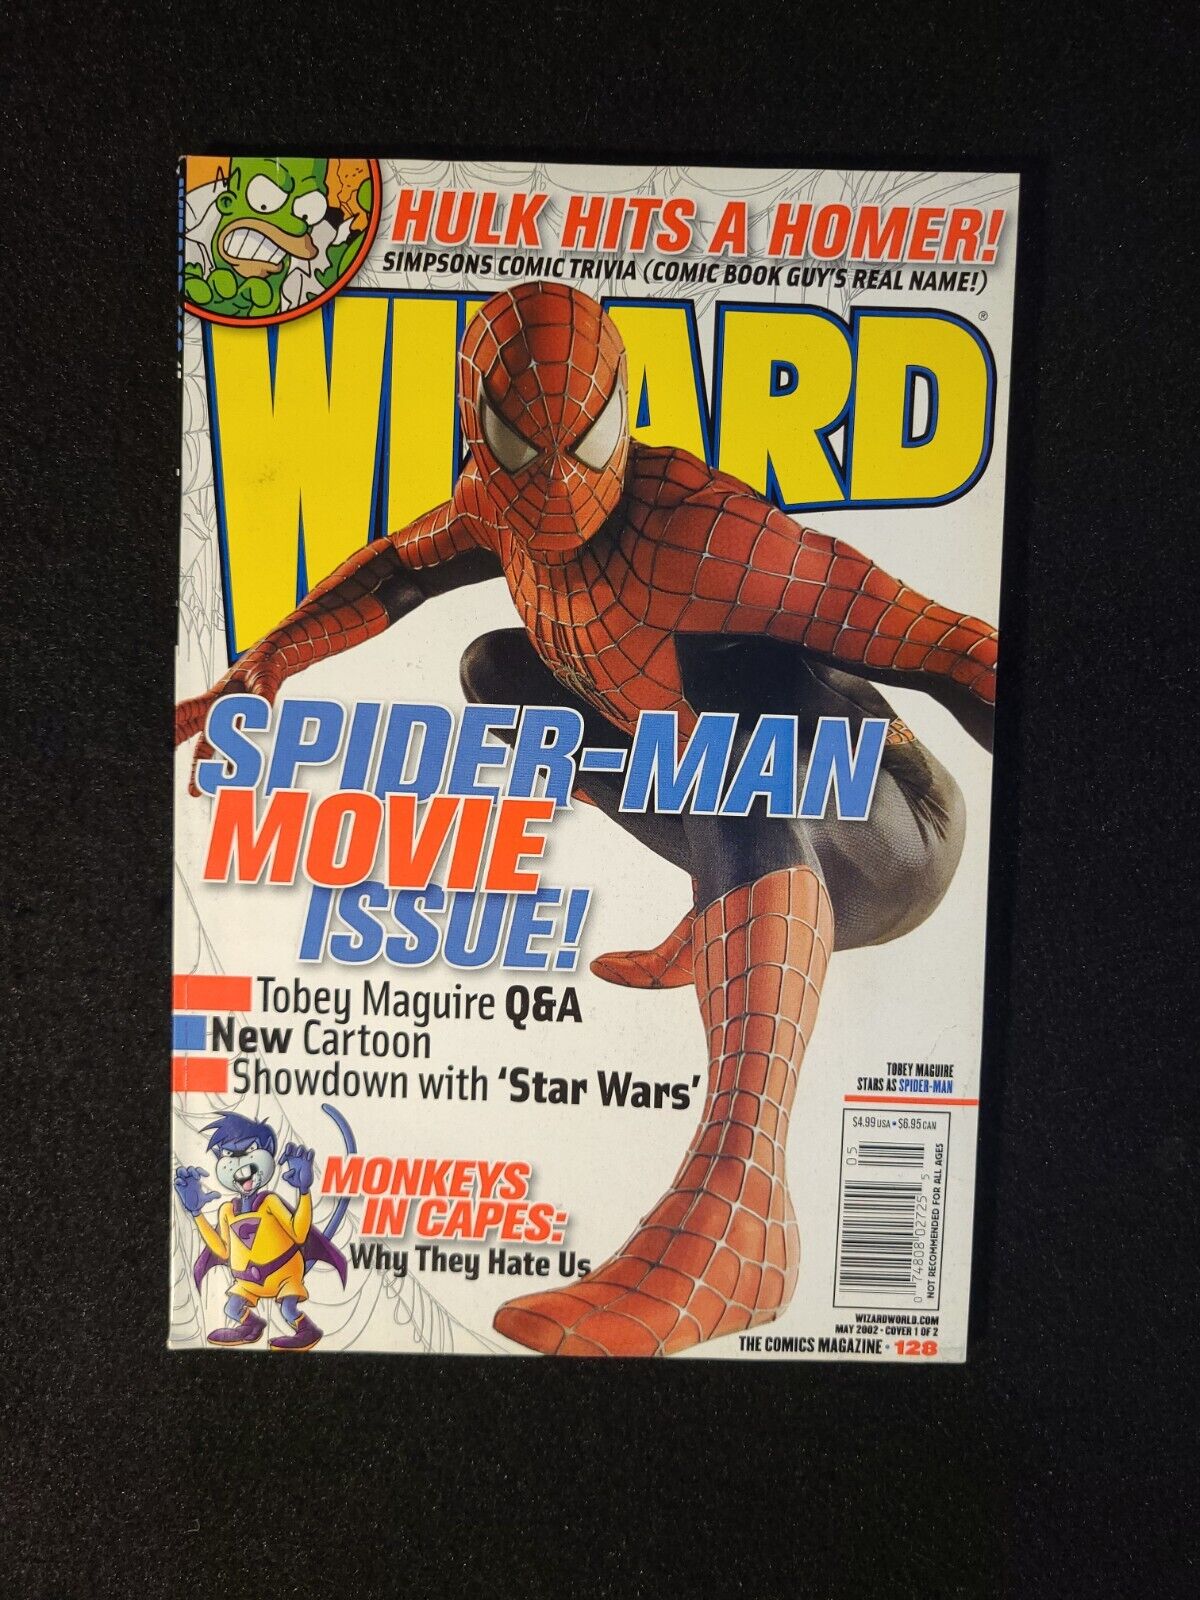 Wizard the Comics Magazine #128 2000 Spider-Man Movie Cover Toby Mcguire 